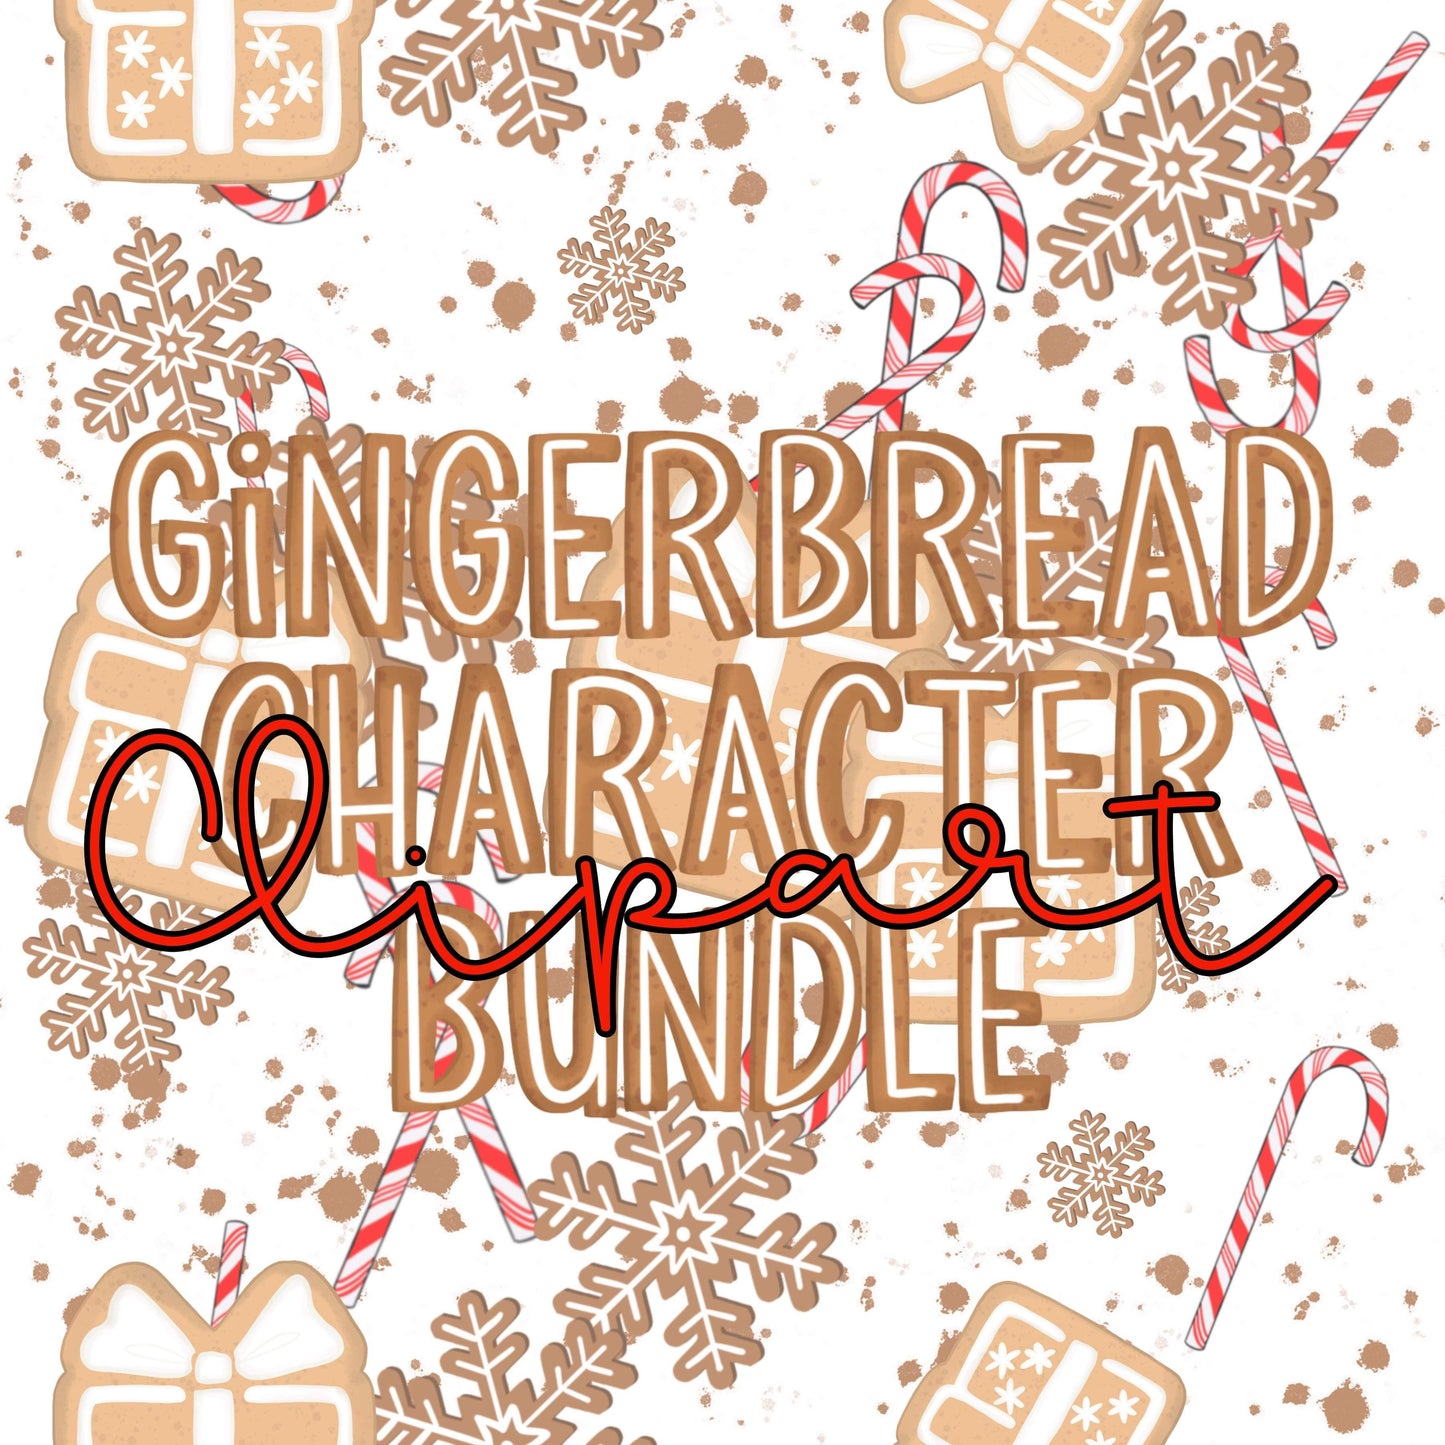 Gingerbread Character Designs & Clipart Bundle w/Commercial License Included - Google Drive